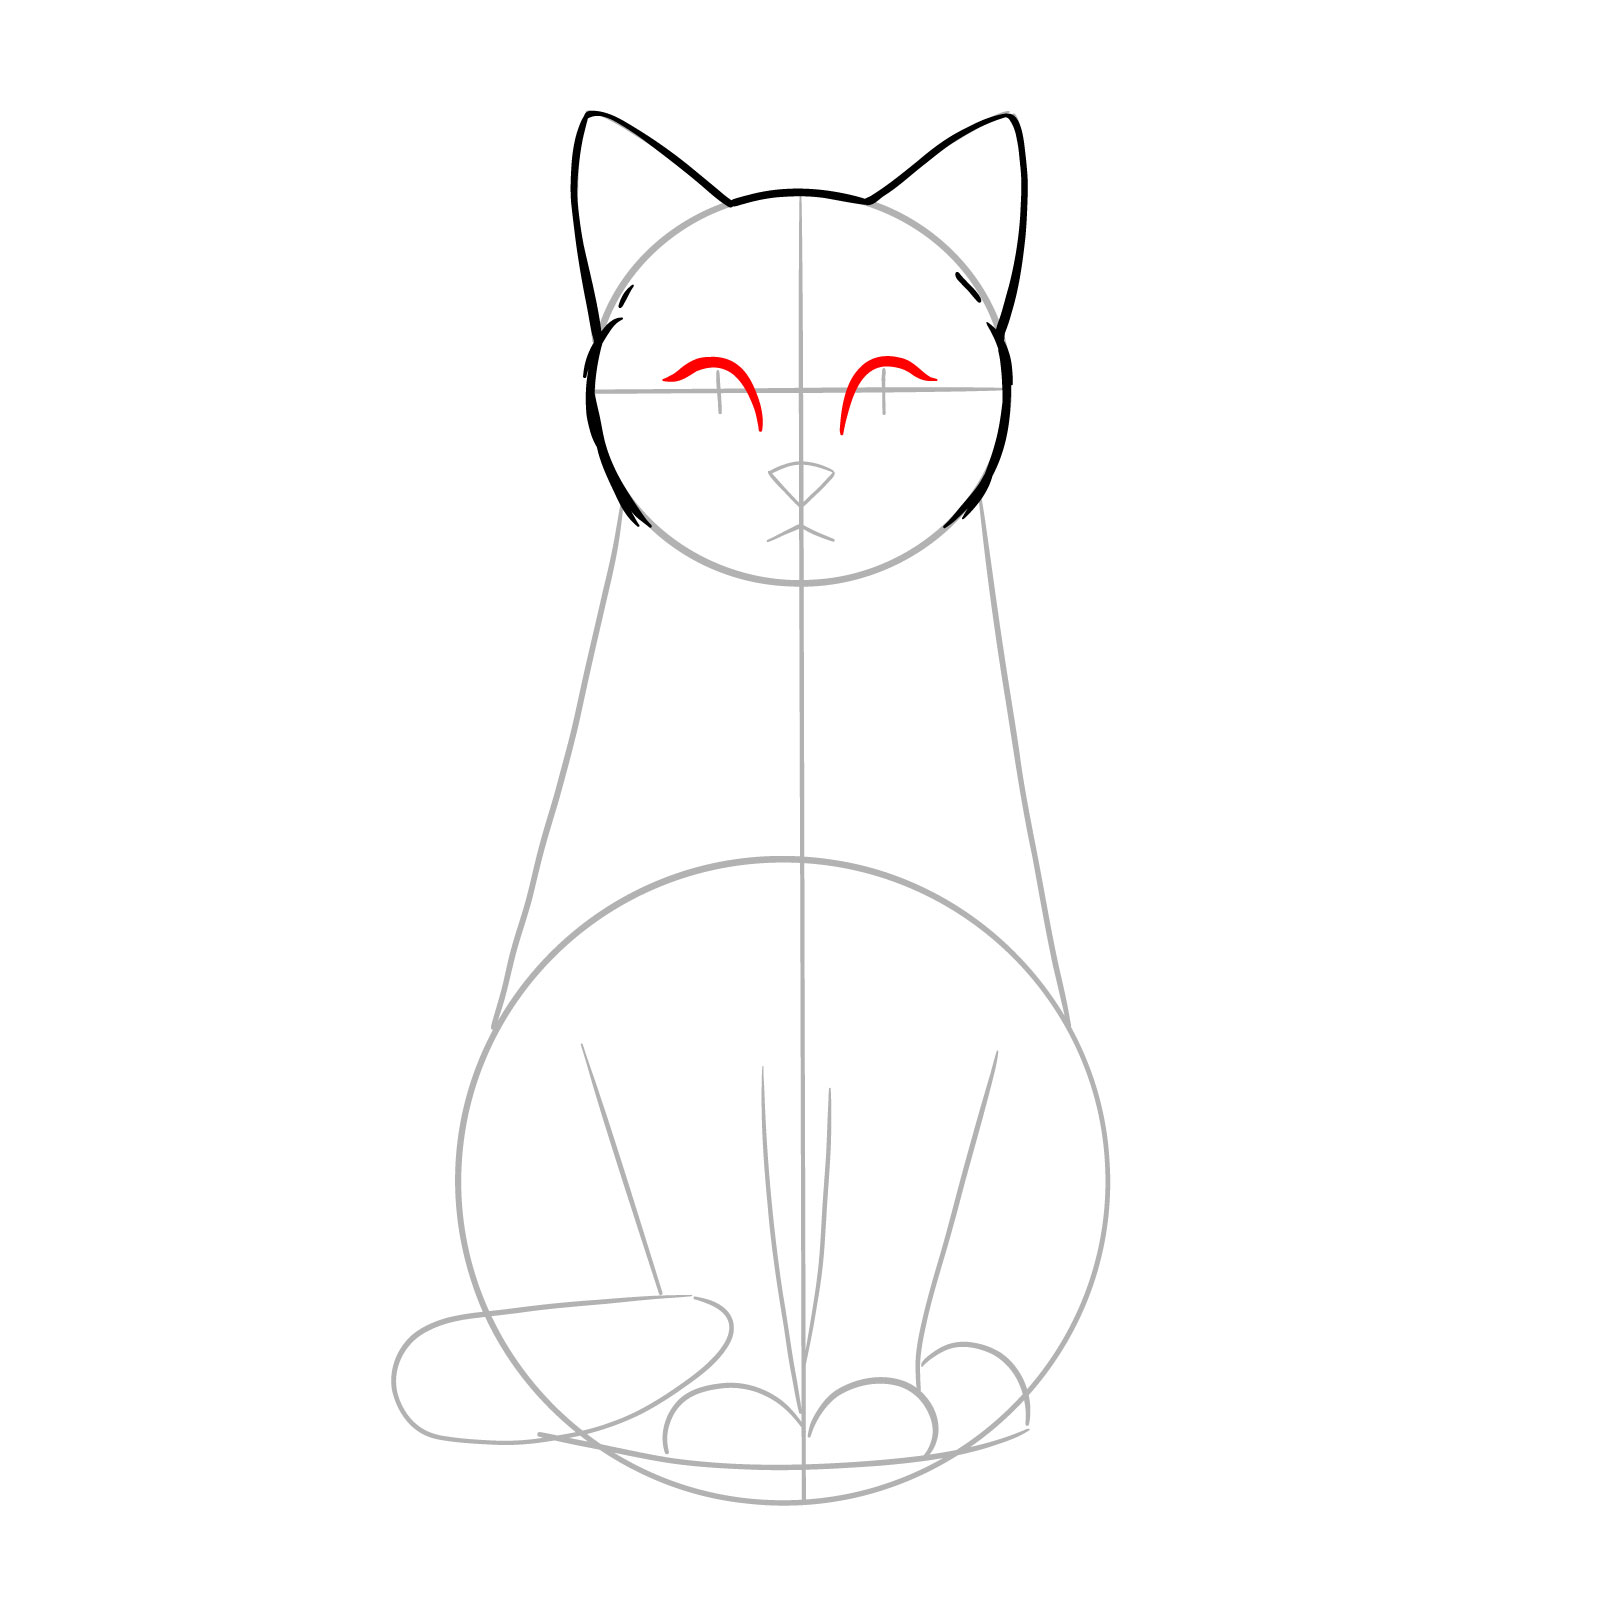 Sketch adding upper eyelids to a sitting cat drawing - step 05